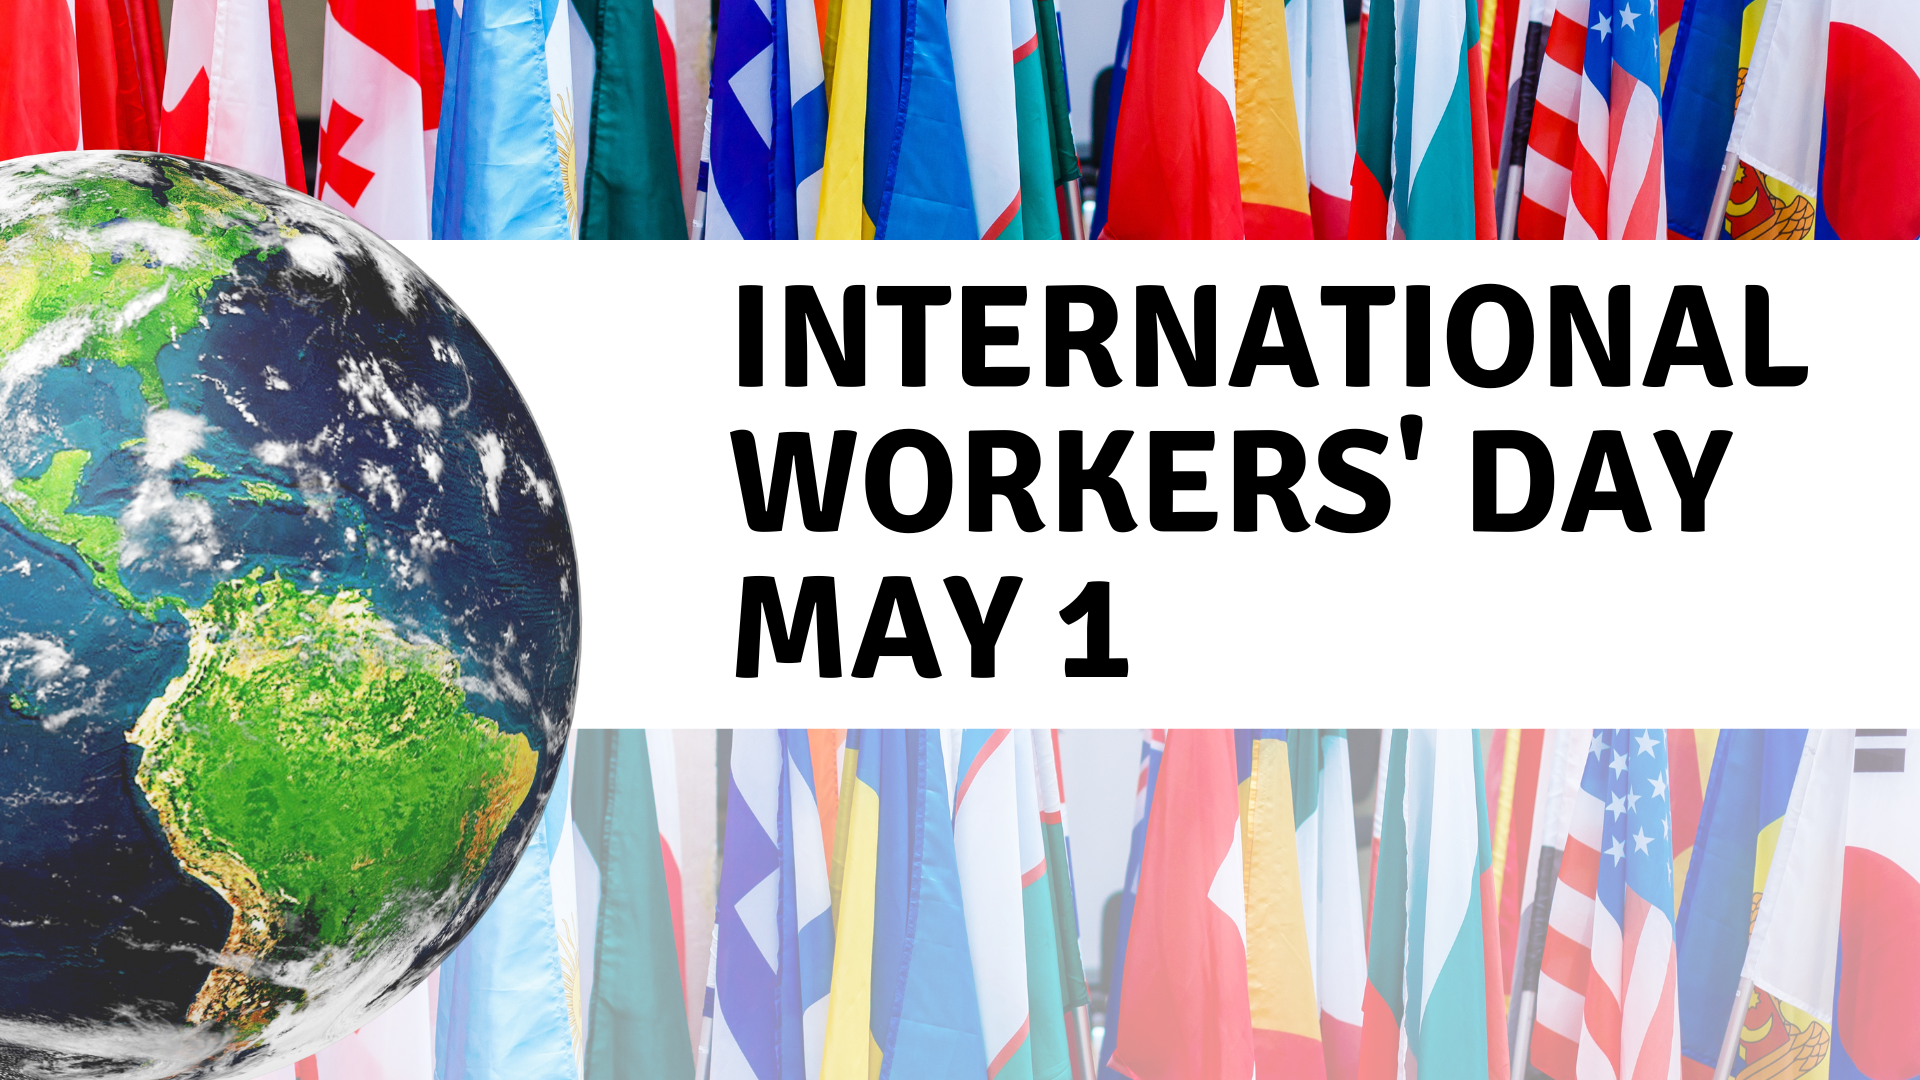 International Workers' Day May 1. Half globe of Earth with country flags in background